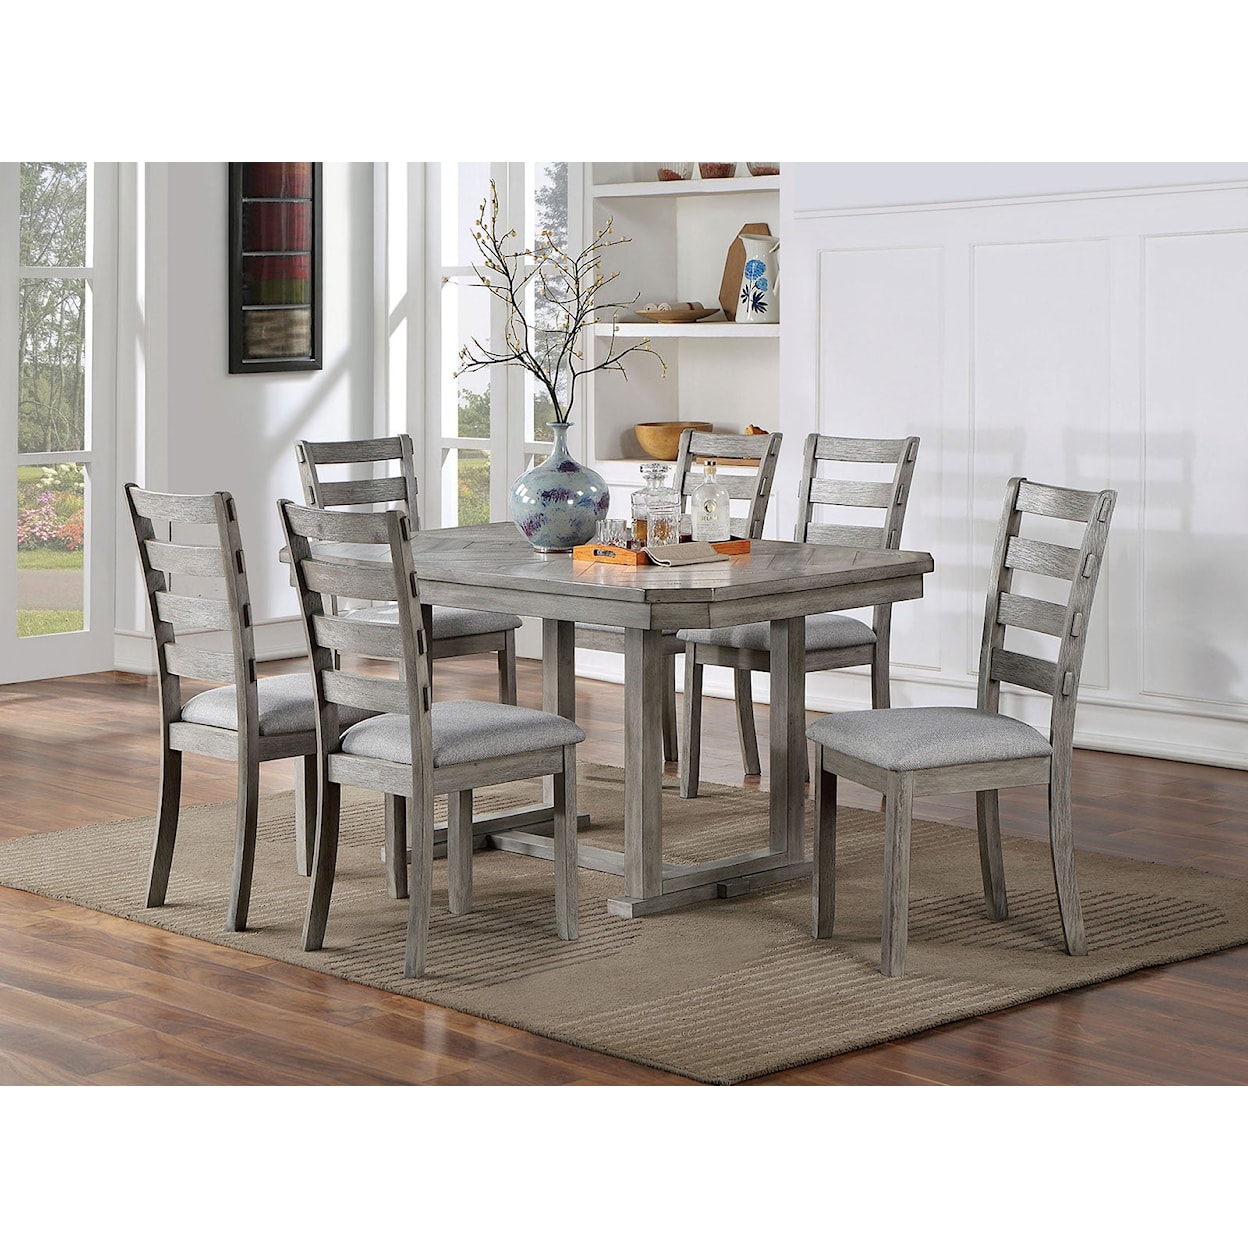 Furniture of America LAQUILA 7 Pc. Dining Table Set